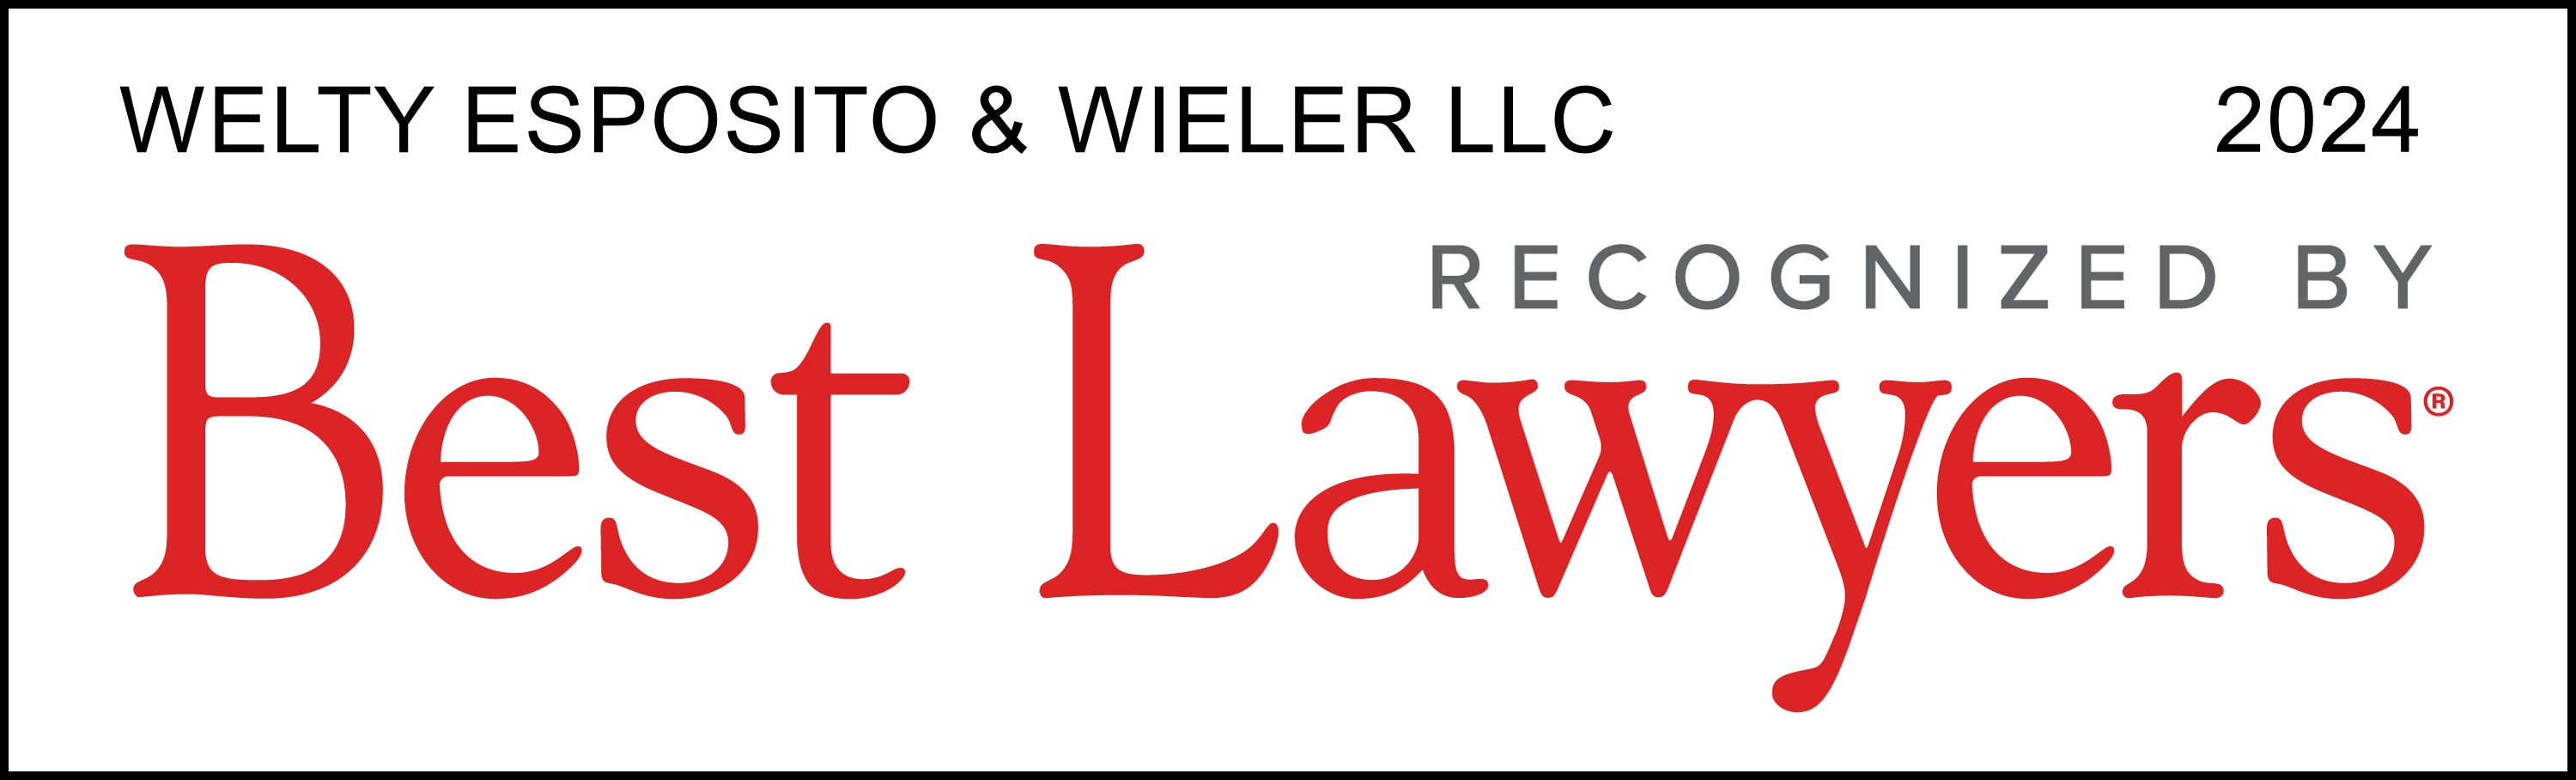 Welty Esposito & Wieler LLC | Recognized By Best Lawyers 2024